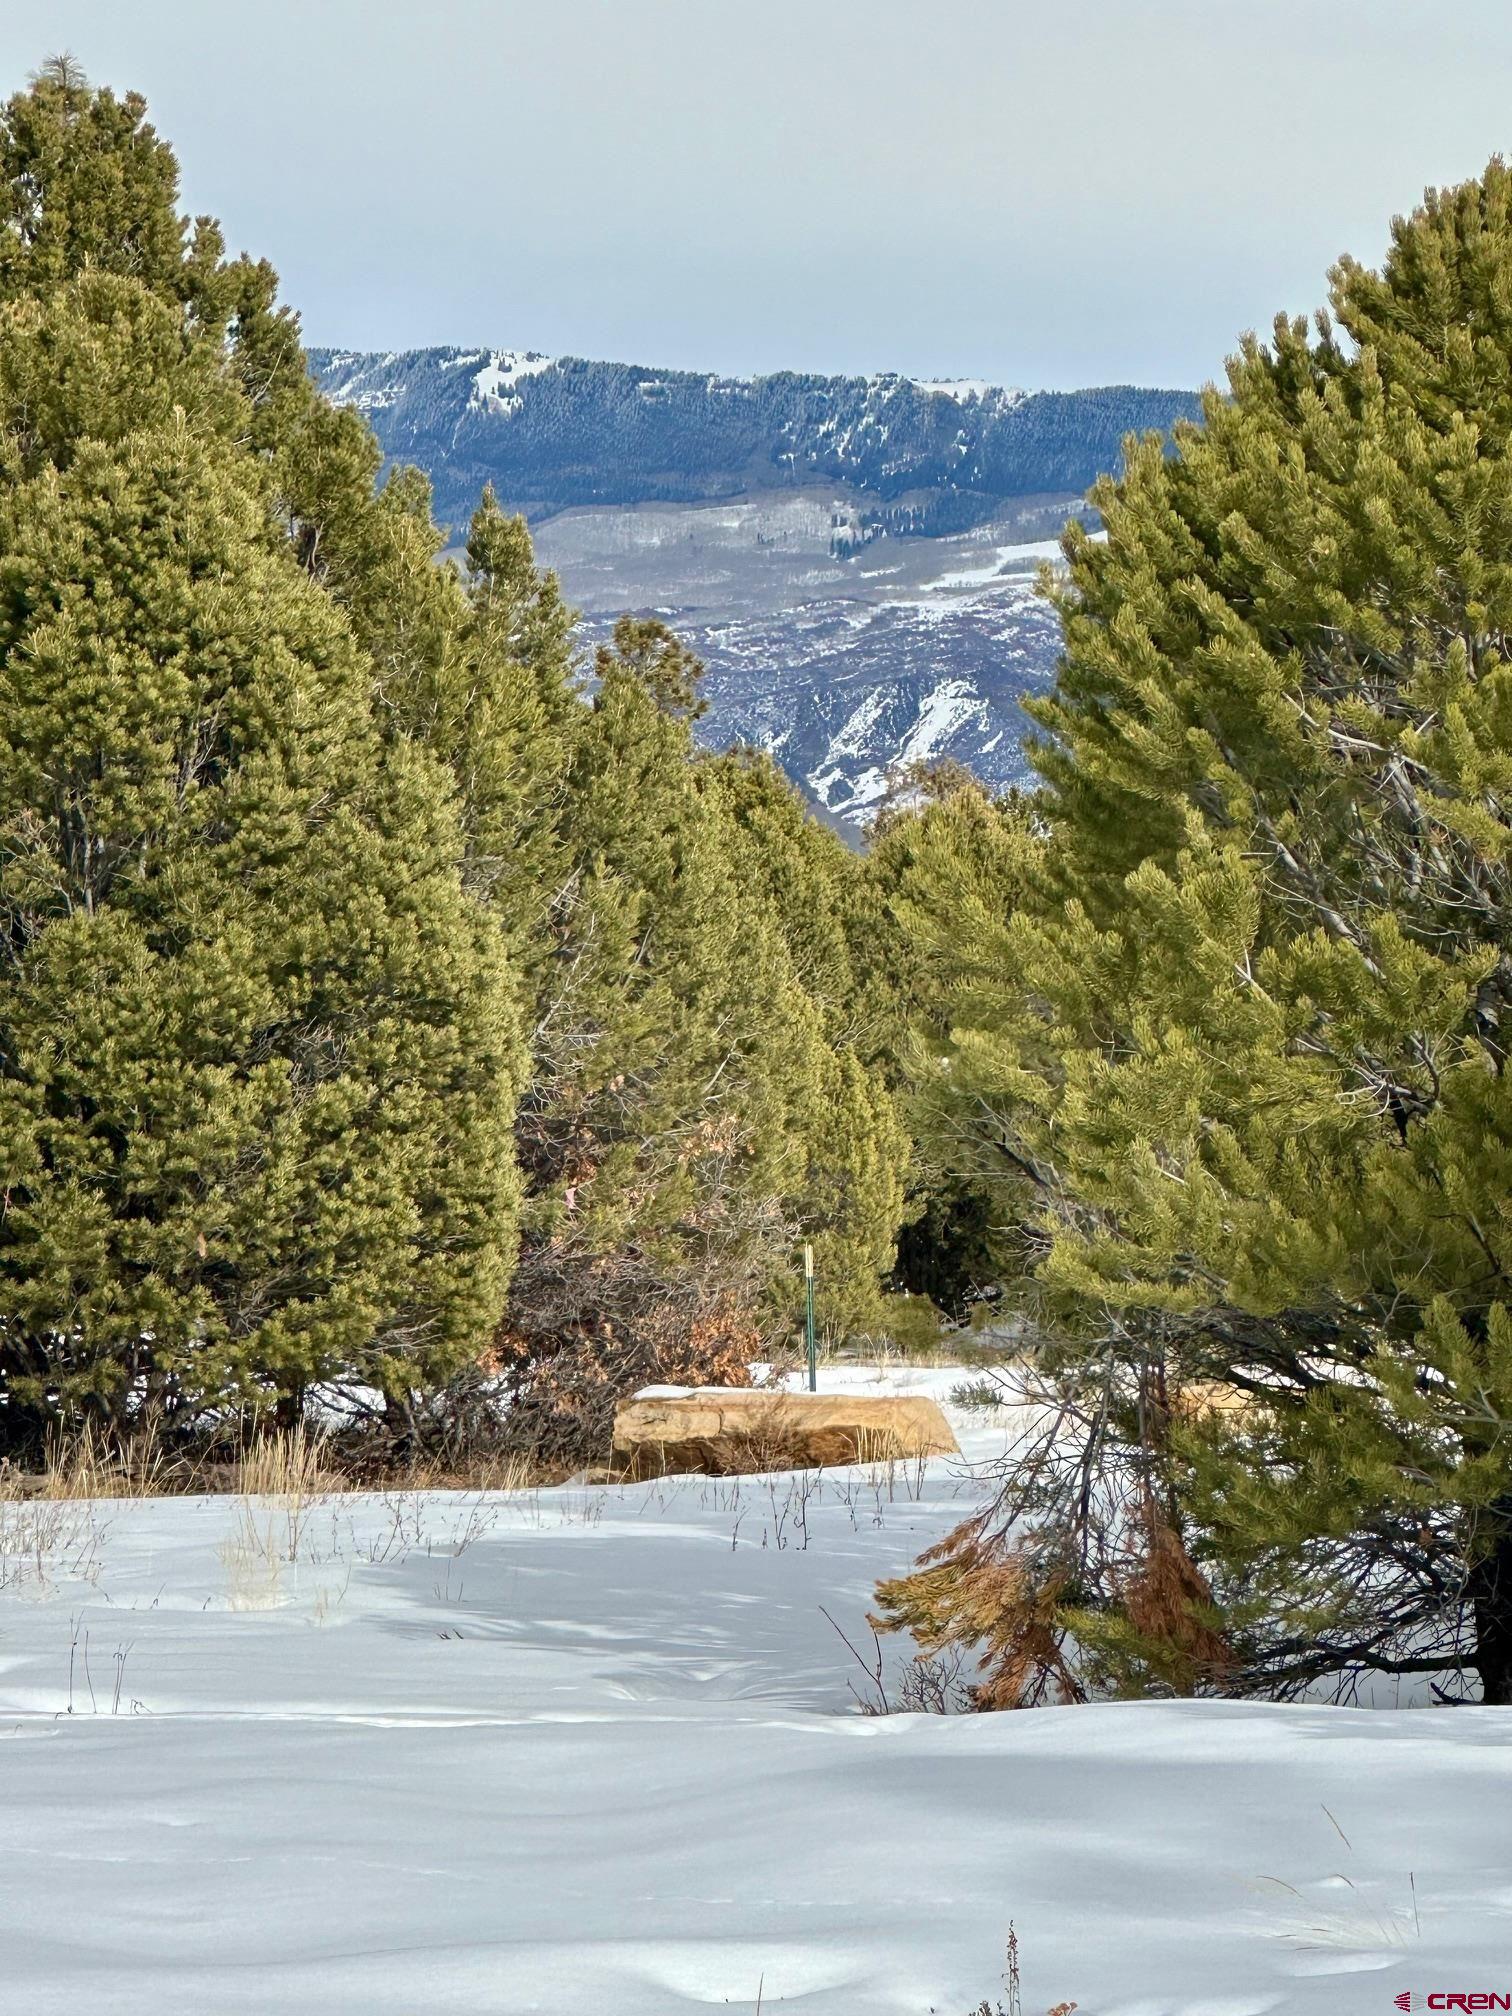 .919 acre lot sitting at the end of the road in the beautiful Fairway Pines Subd. Build your home here and enjoy the location and all the activities that surround it. You are right next to the San Juan Mountains and Ridgway reservoir for hiking, fishing and recreation. Telluride and Montrose are also nearby. The lot includes a paid water tap, and there is gas/power right to the lot line. The lot also includes the Fairway Pines Architectual committee approved plans for your potential home. The lot has mature Ponderosa and Pinyon Pine trees for privacy and wildlife. Don't miss out on this great lot!